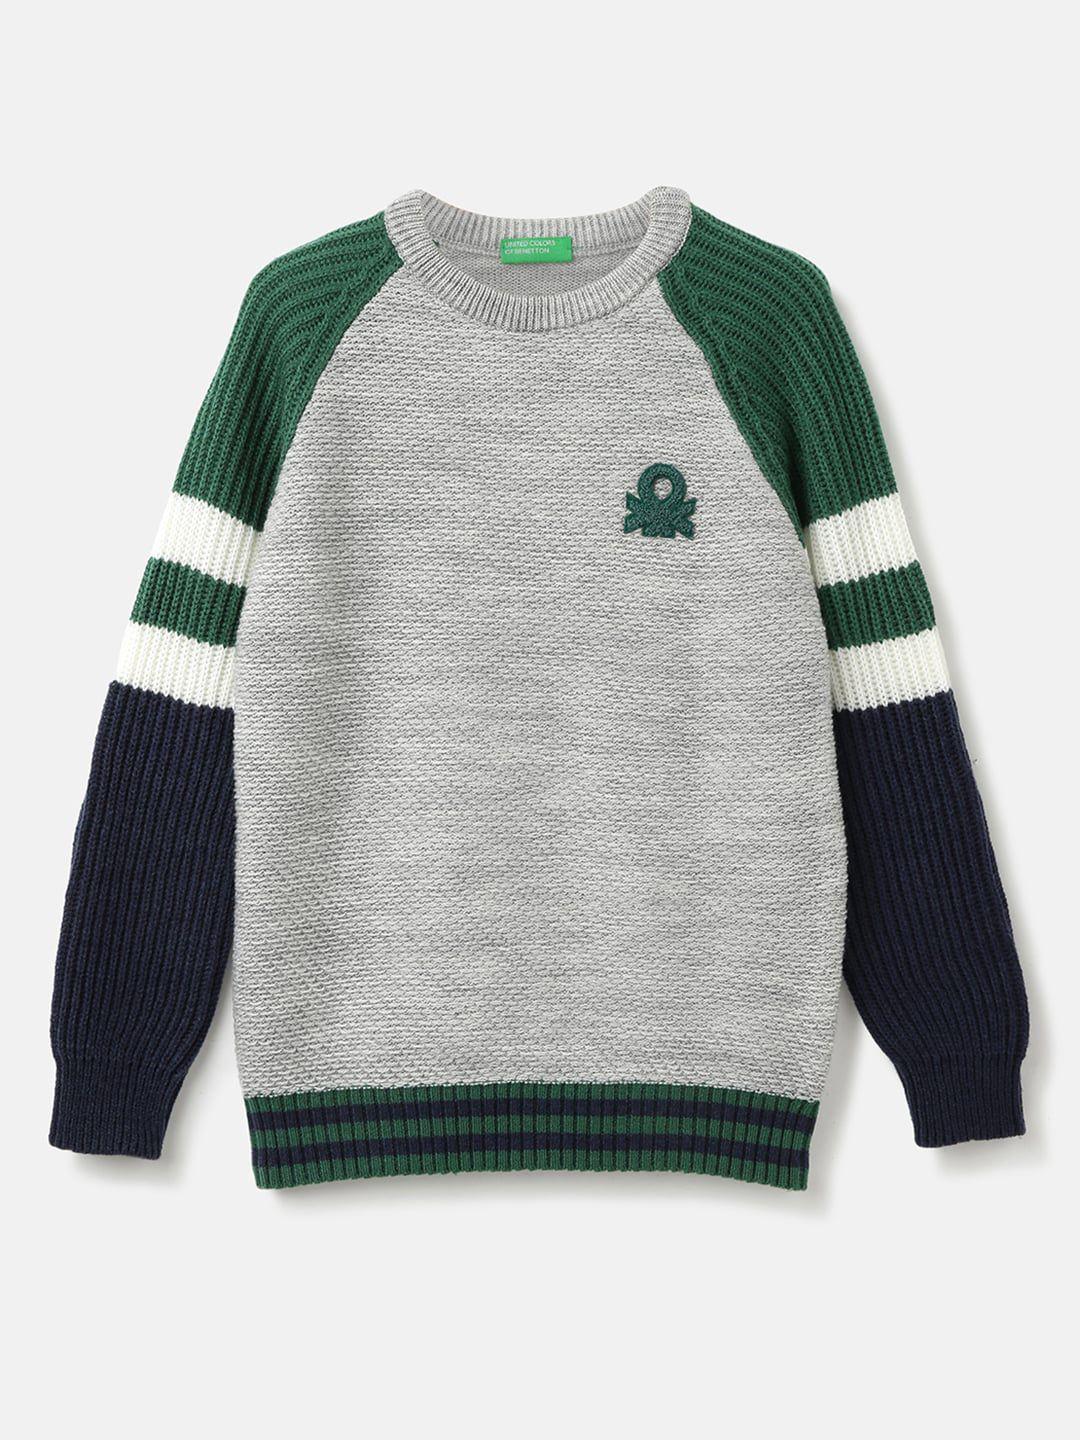 united-colors-of-benetton-boys-round-neck-colourblocked-pullover-sweater